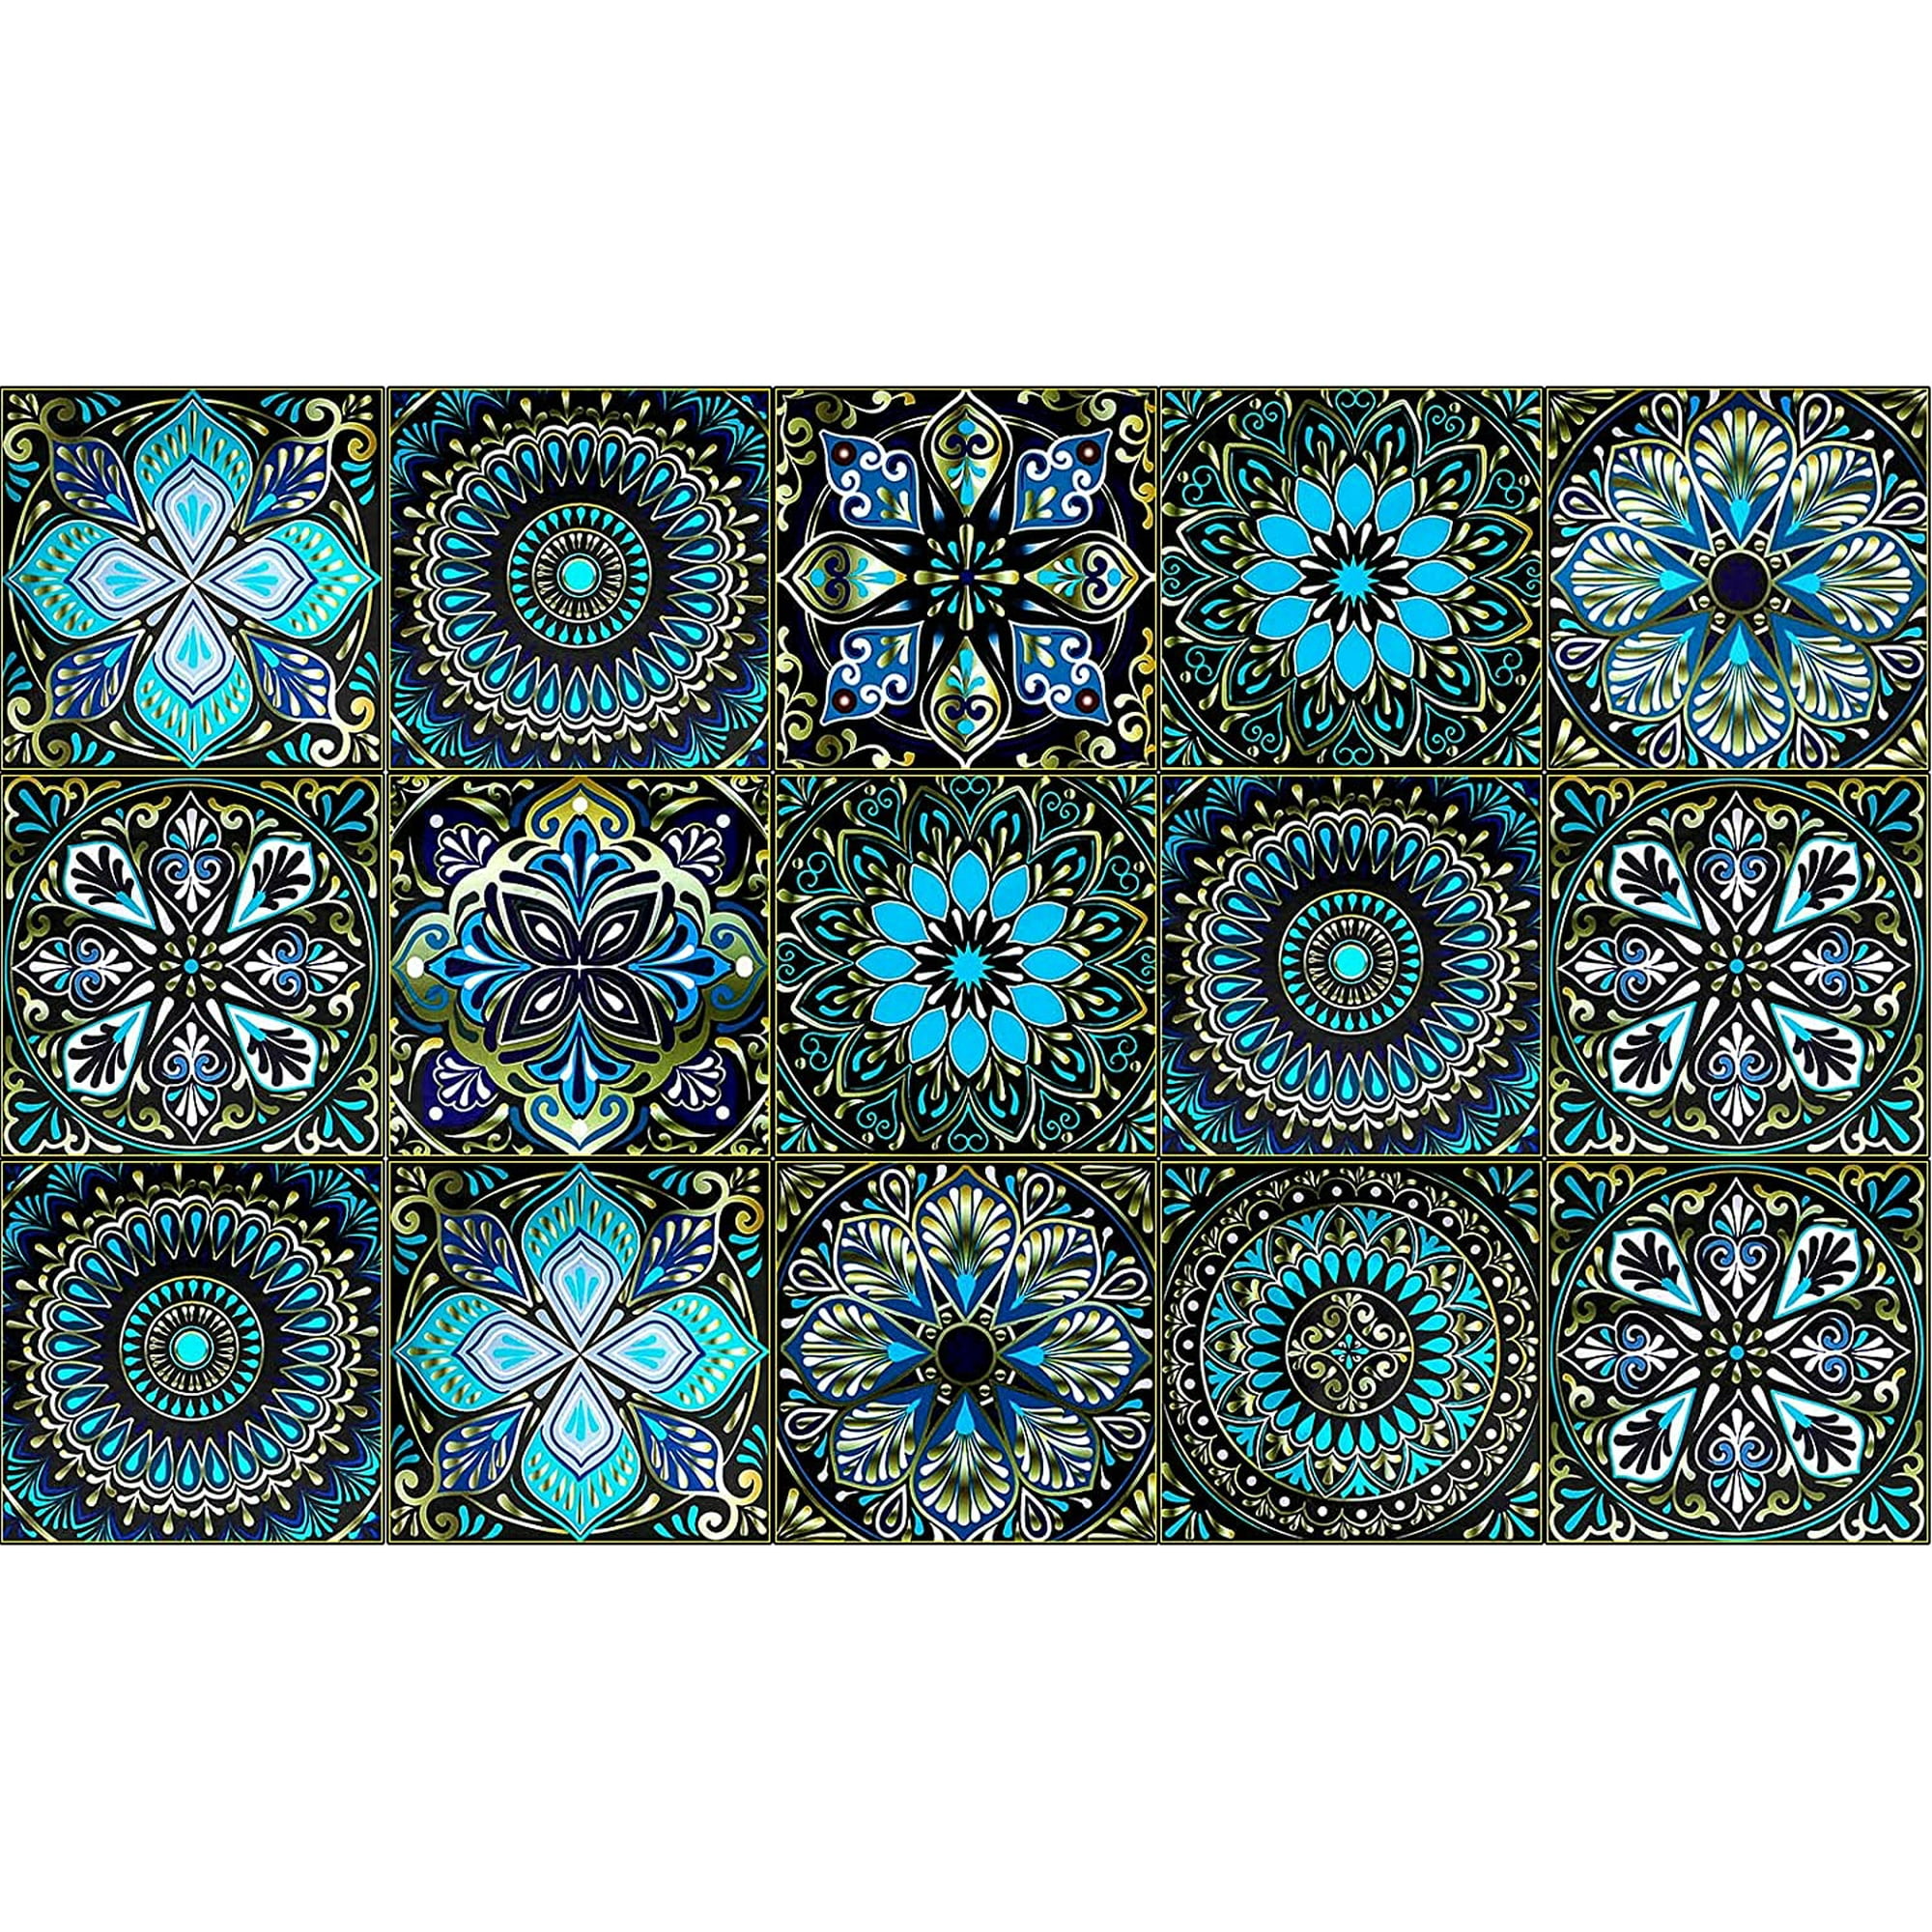 15 Pieces Mandala Style Decorative Tile Stickers Peel and Stick Self Adhesive Removable Moroccan Tiles for Home Decor Furniture Decor 6 x 6 Inch Simple Style Backsplash Tile Stickers Staircase 